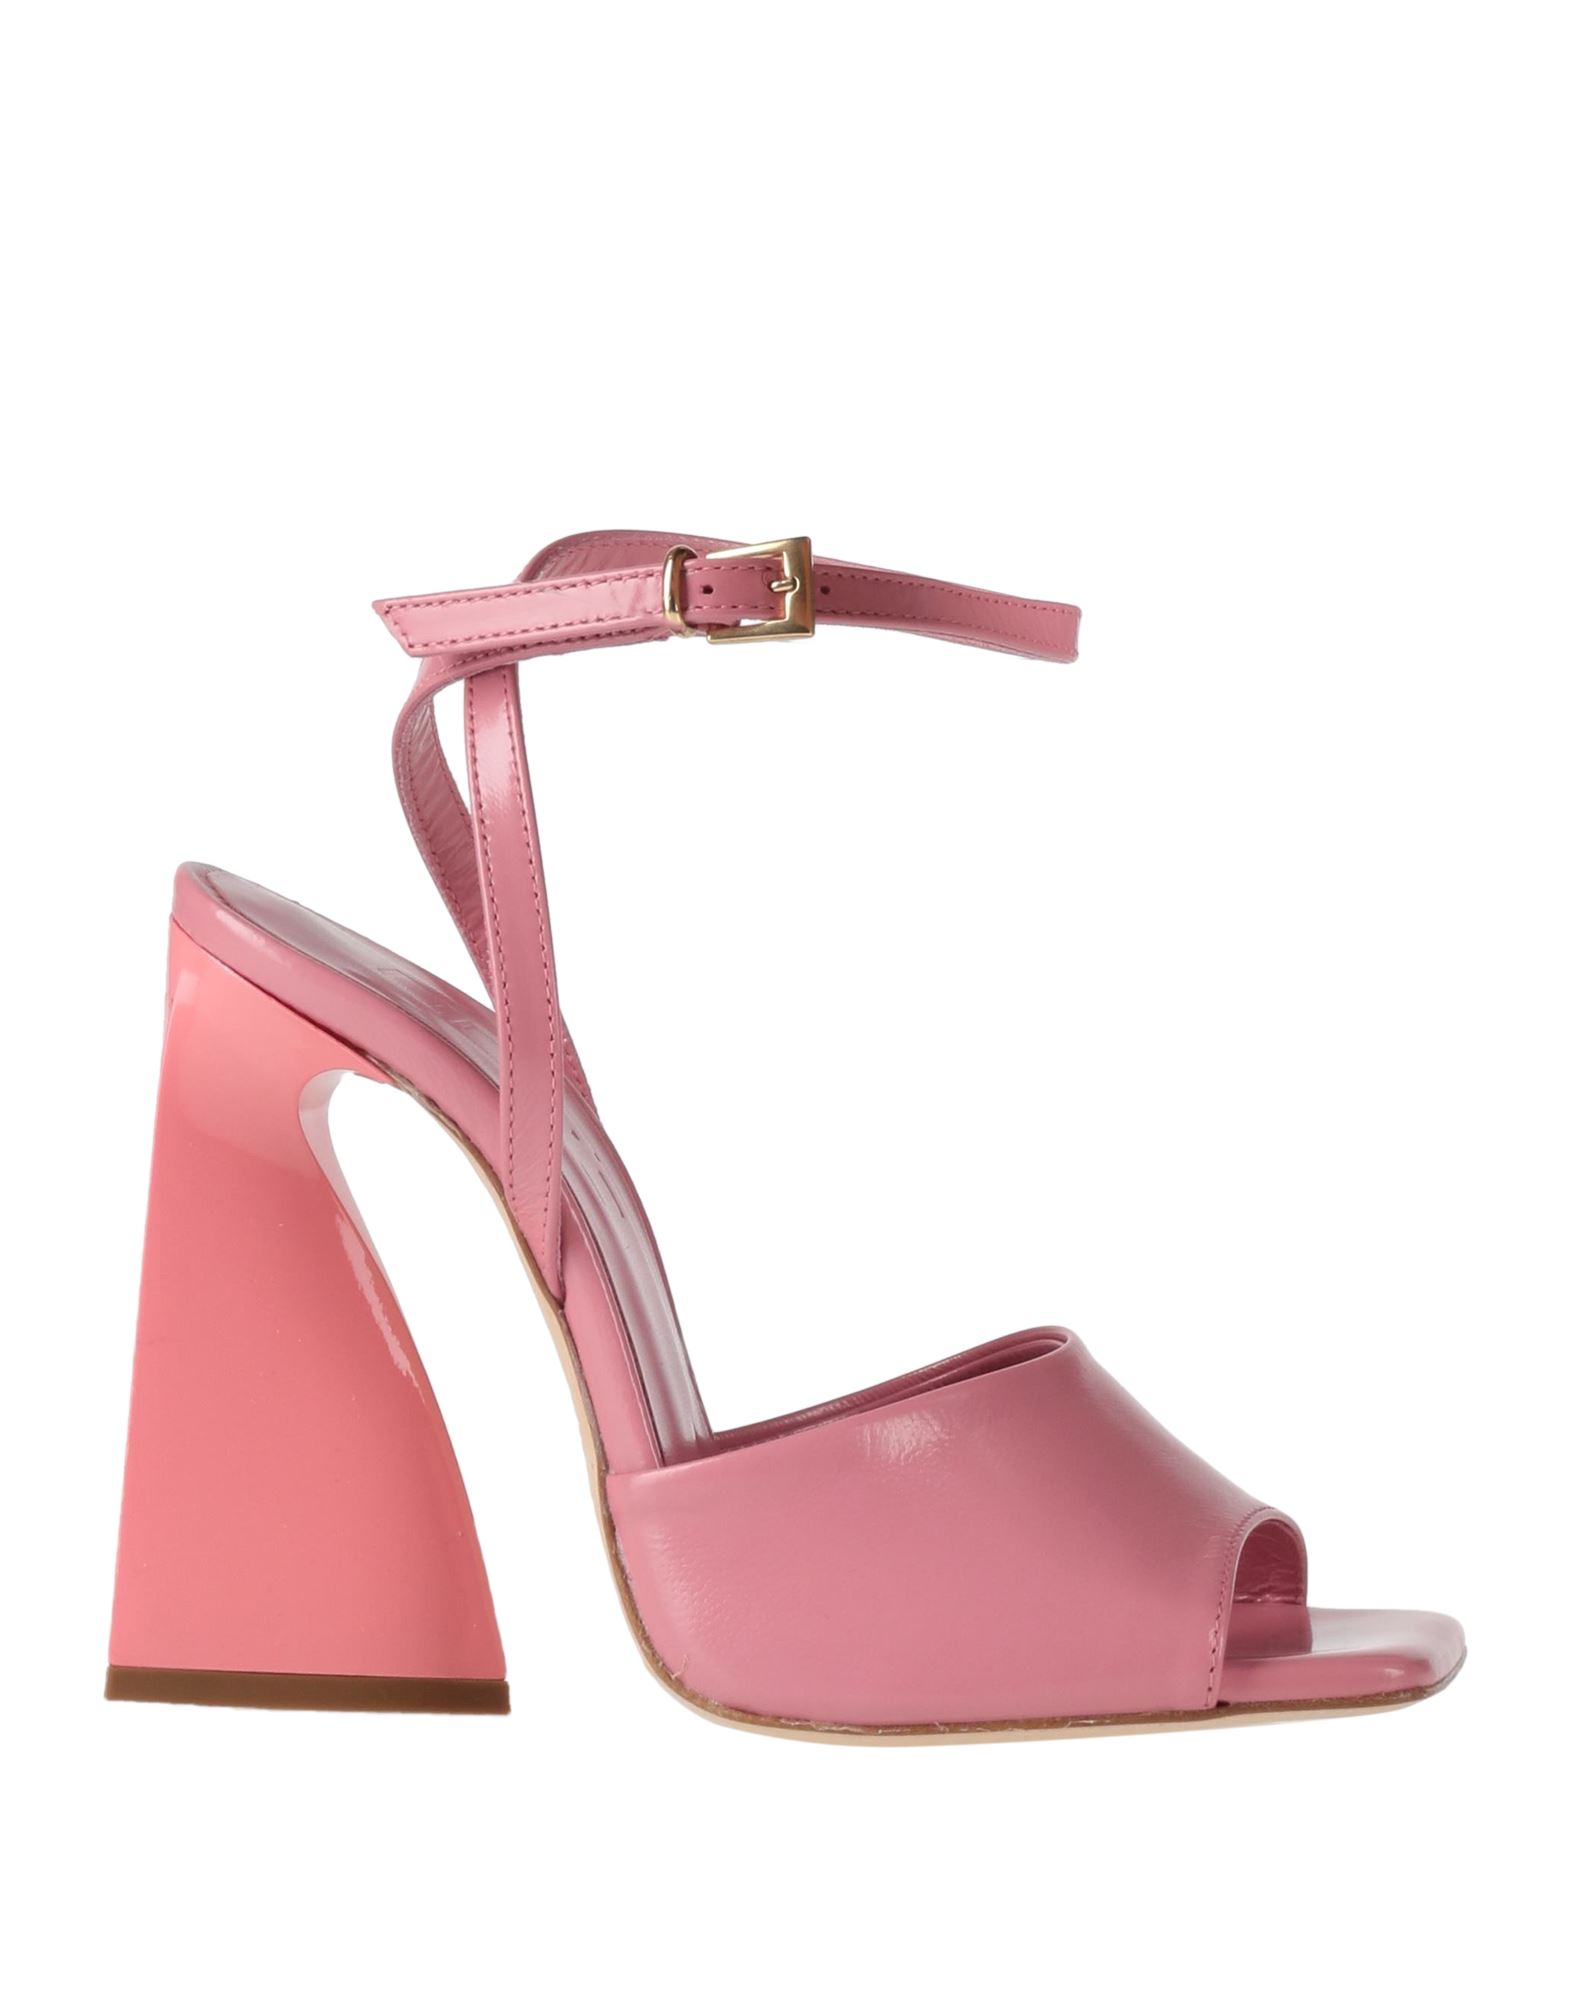 Ncub Sandals In Pink